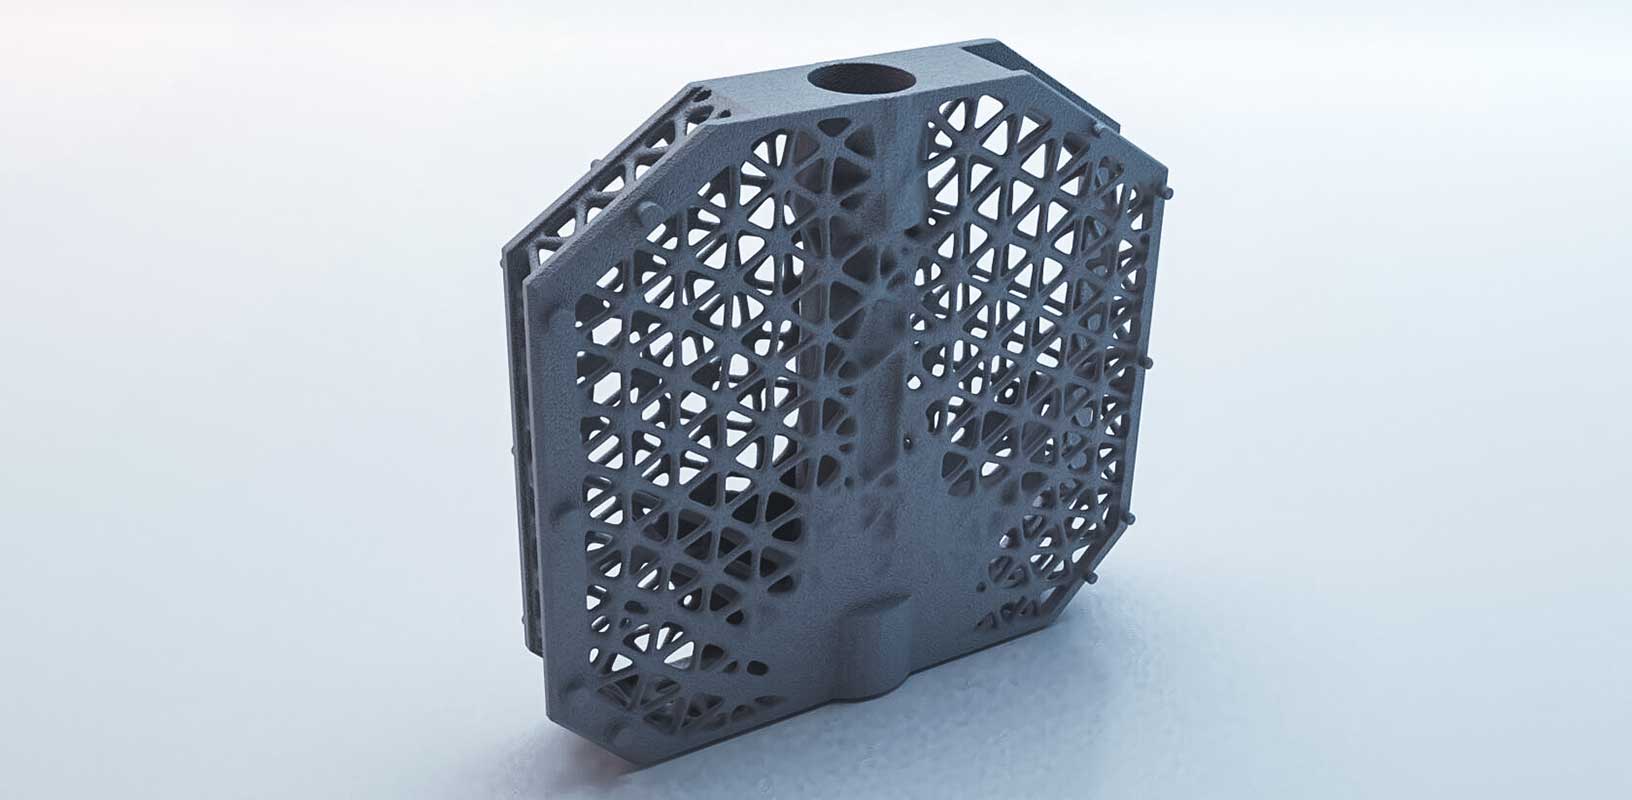 Bike pedal produced by additive manufacturing using advanced design for additive manufacturing tools